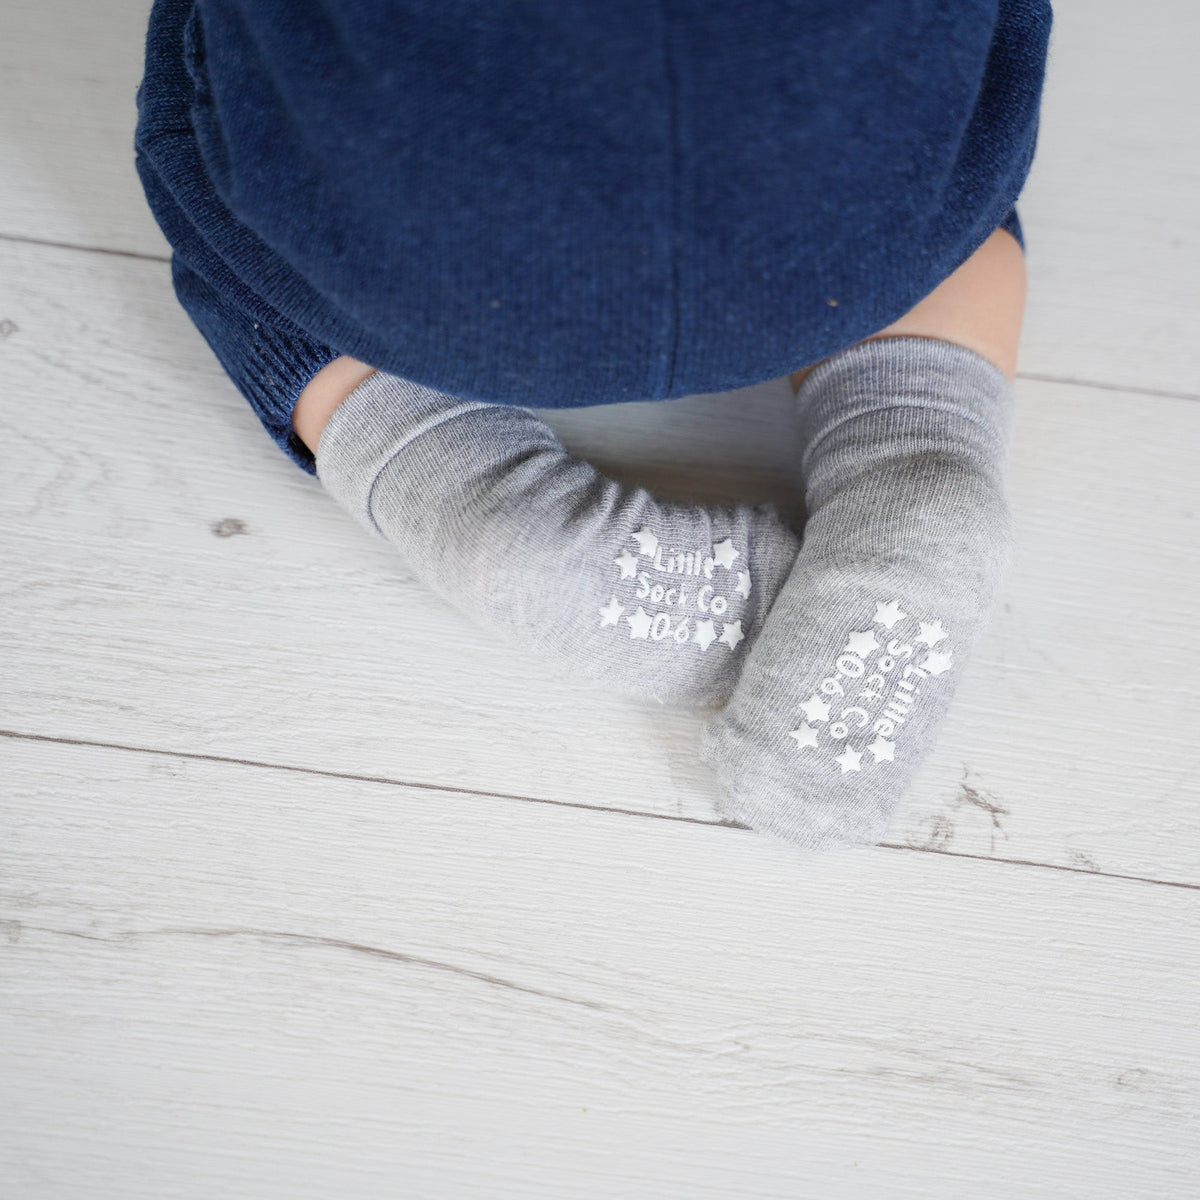 Talipes (clubfoot) Boots and Bar Socks - Non-Slip Stay On Baby and Toddler Socks - 3 Pack in White, Oat & Grey Marl